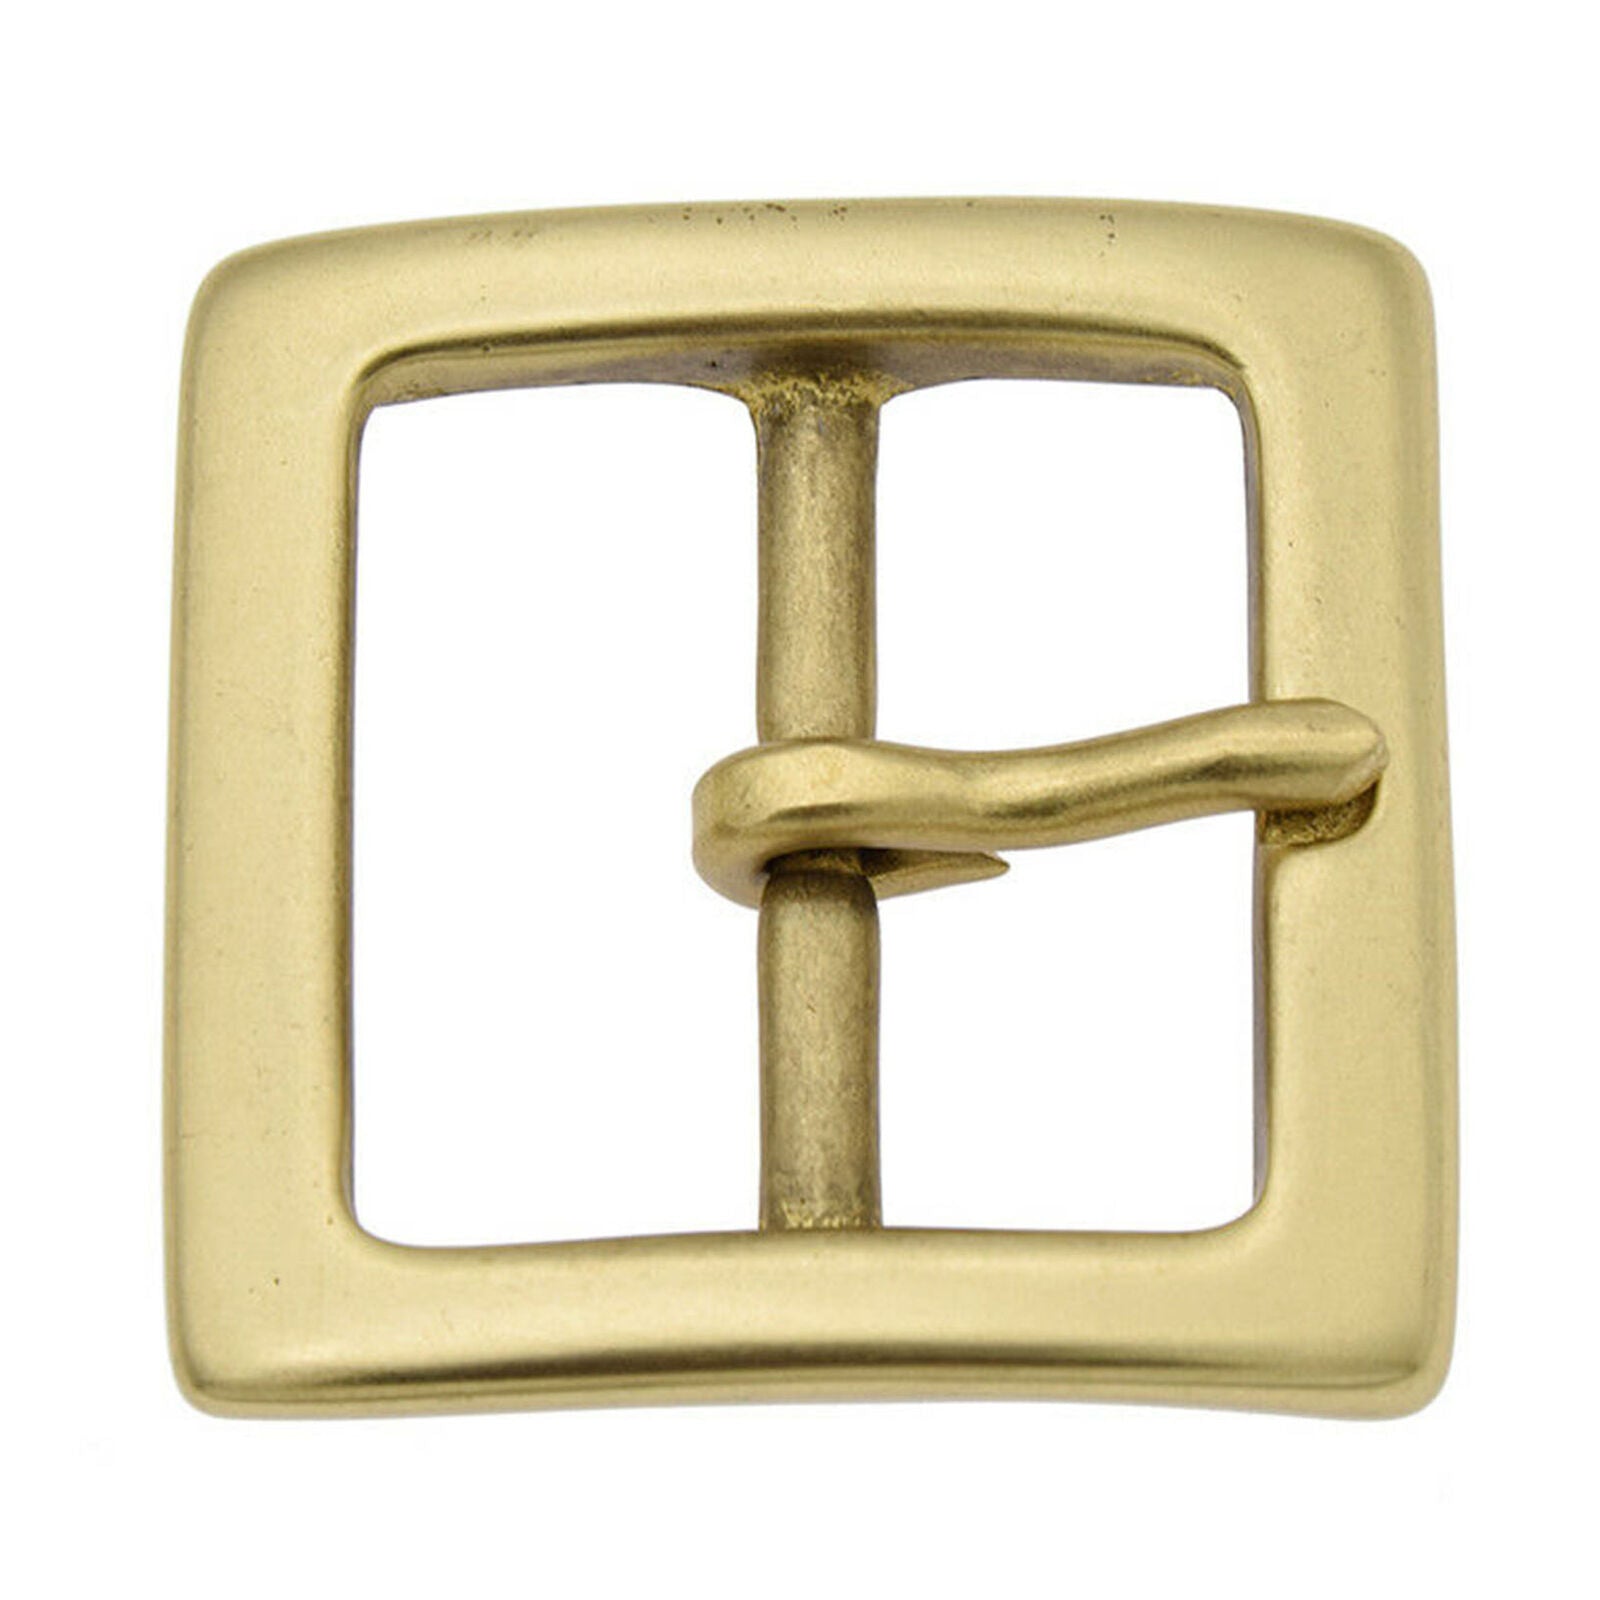 1x Polished Solid Brass Belt Buckle For Wide Belt Replacement New